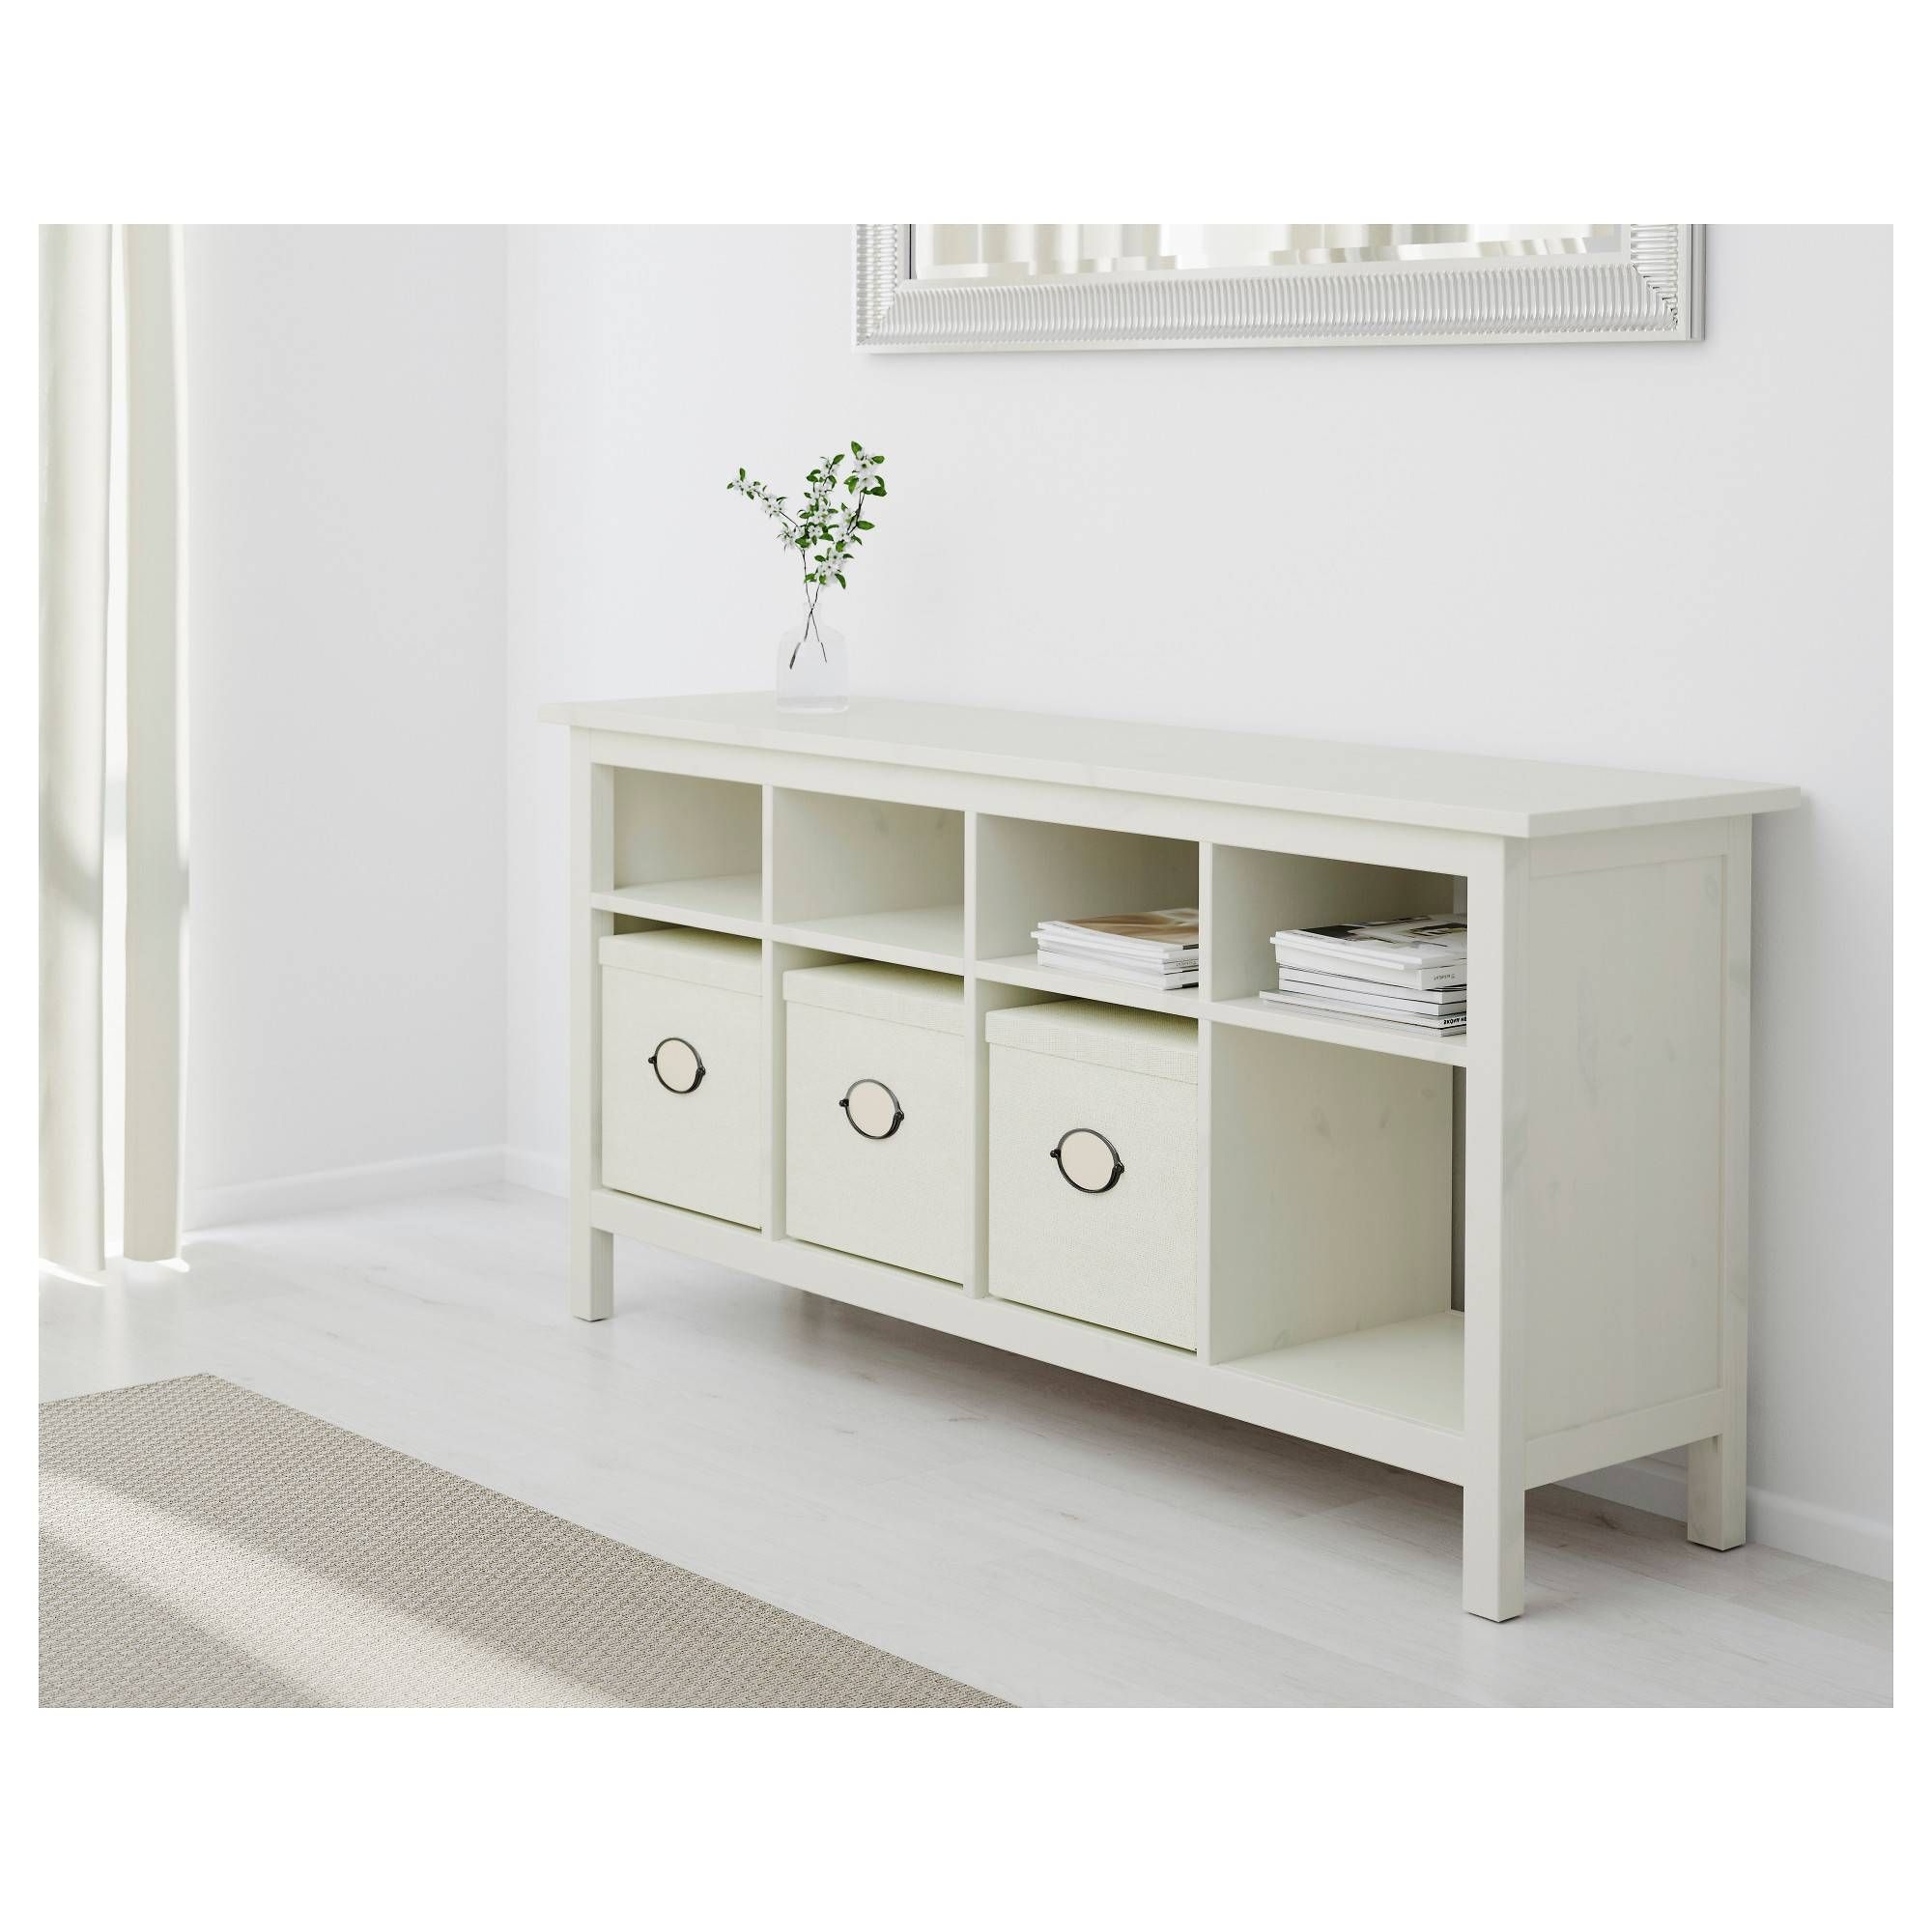 Best Of Ikea Hemnes Sideboard – Bjdgjy With Most Recently Released White Gloss Ikea Sideboards (View 11 of 15)